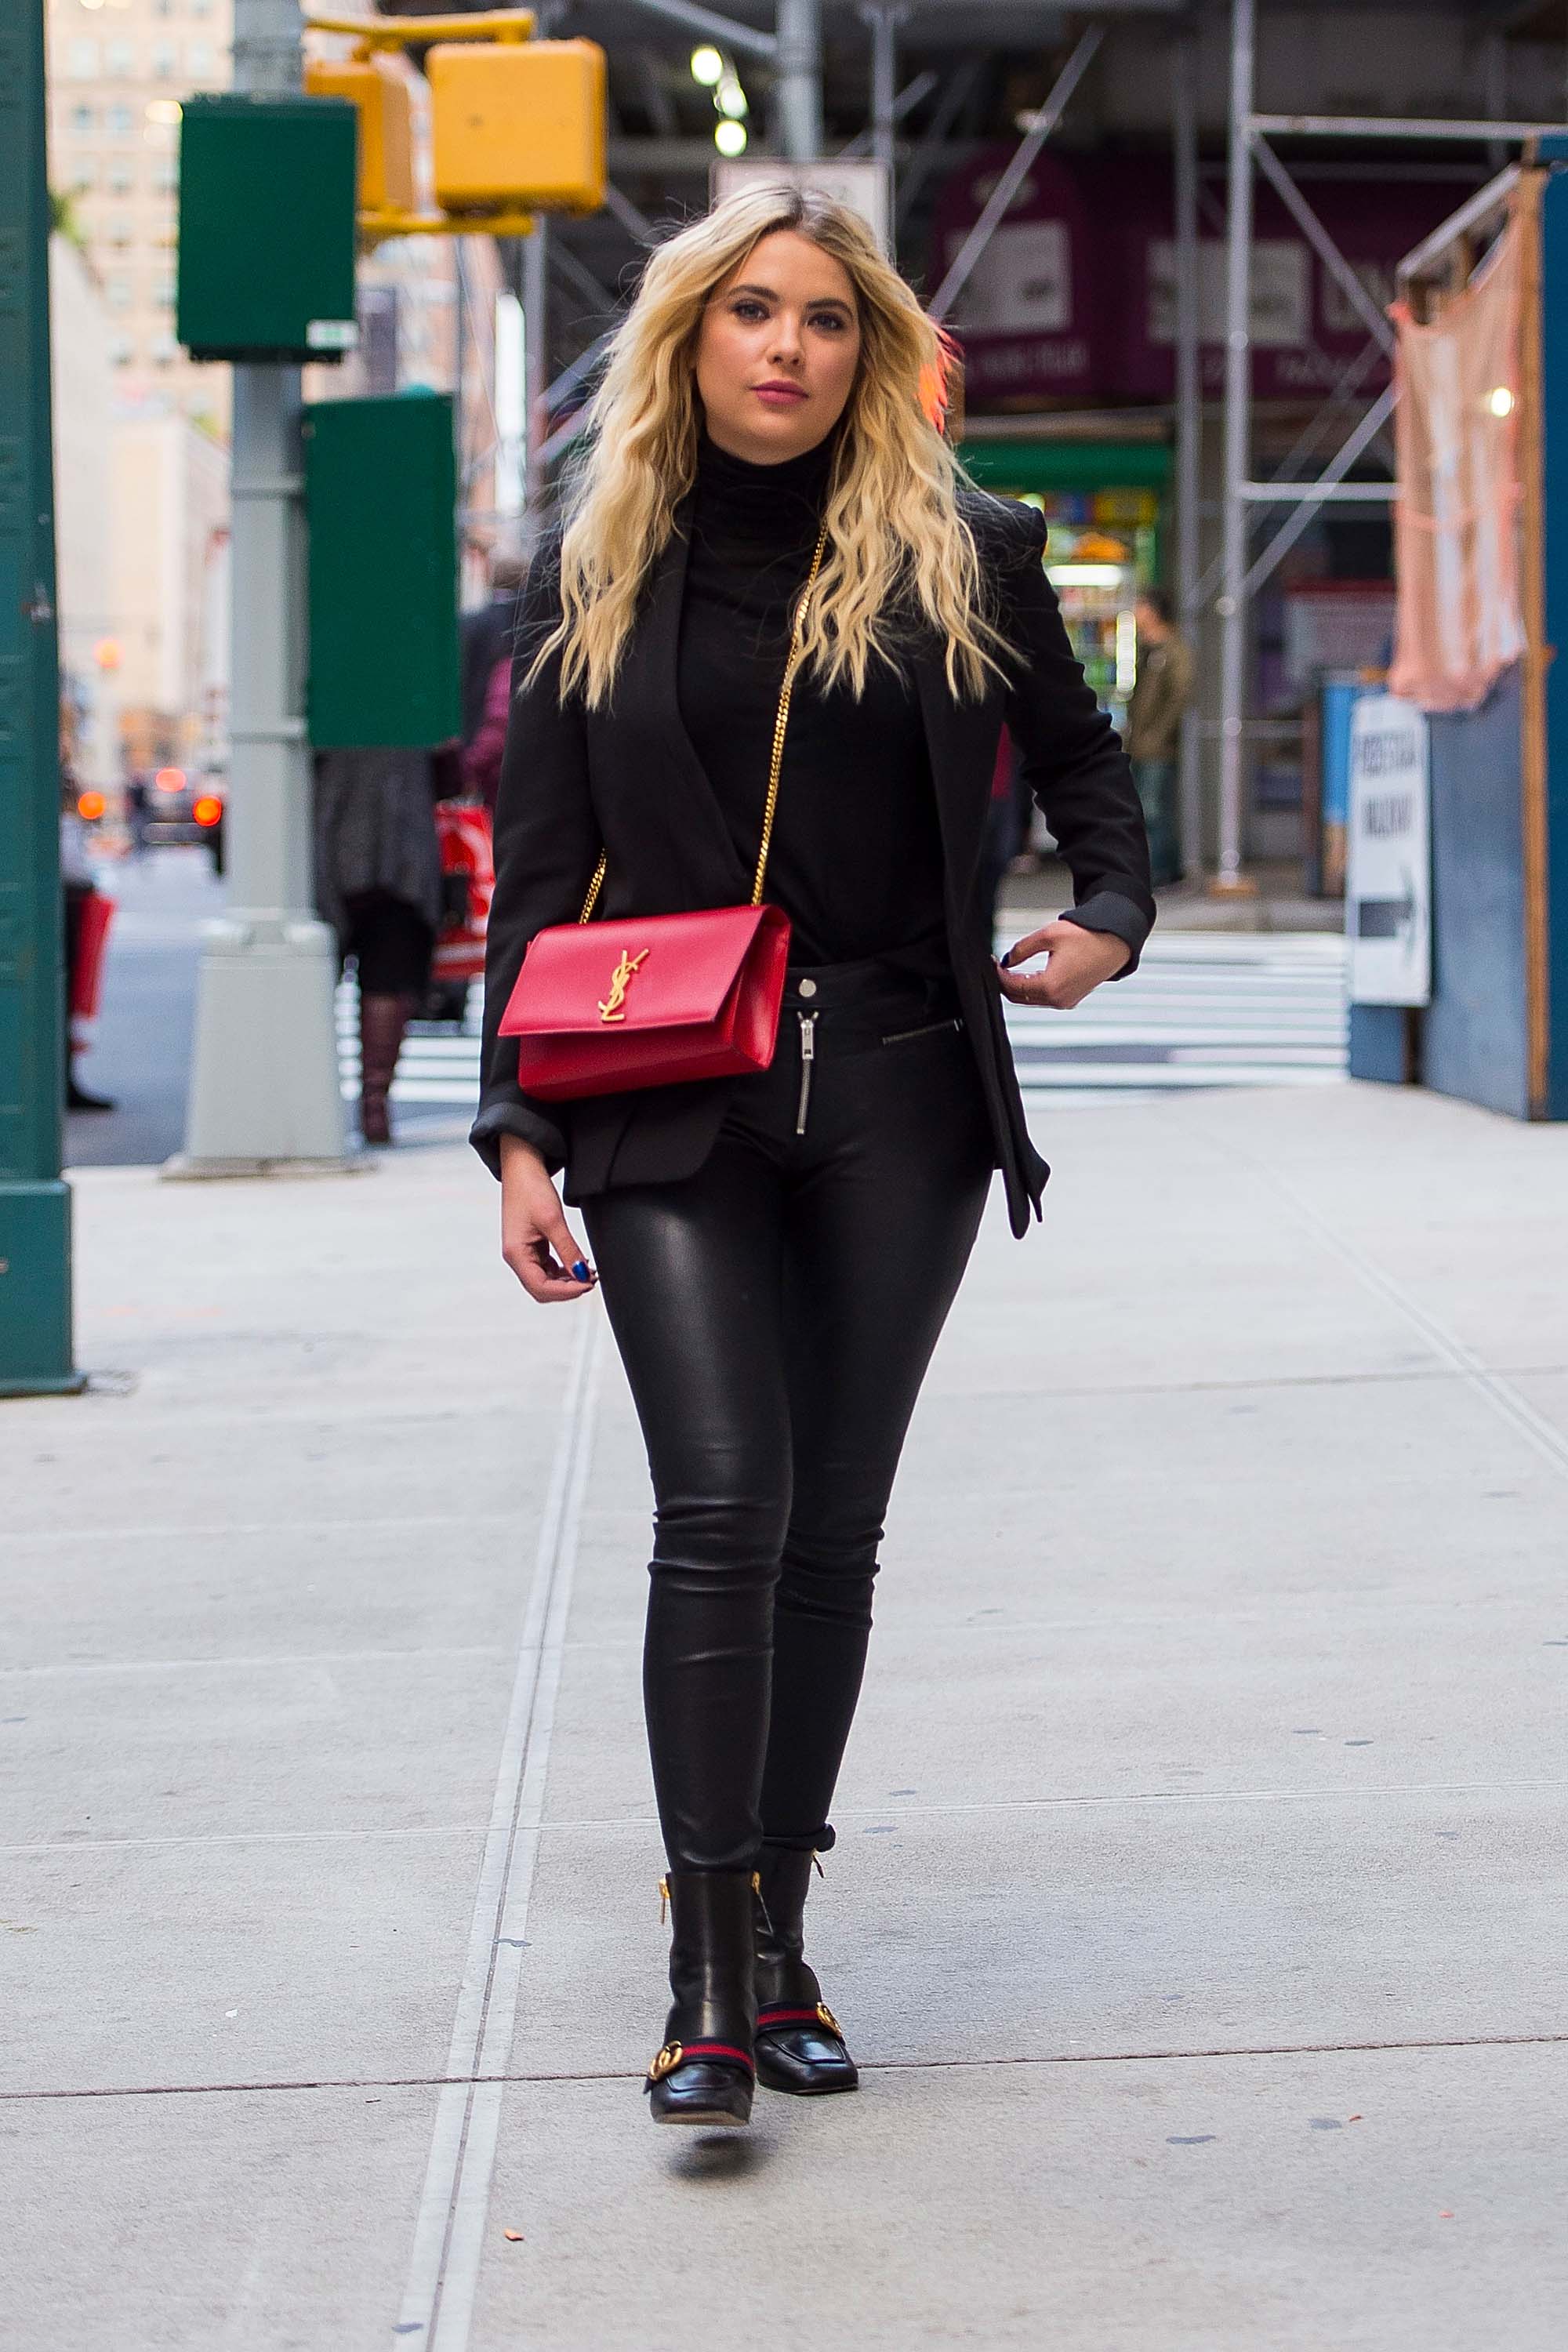 Ashley Benson out in NYC